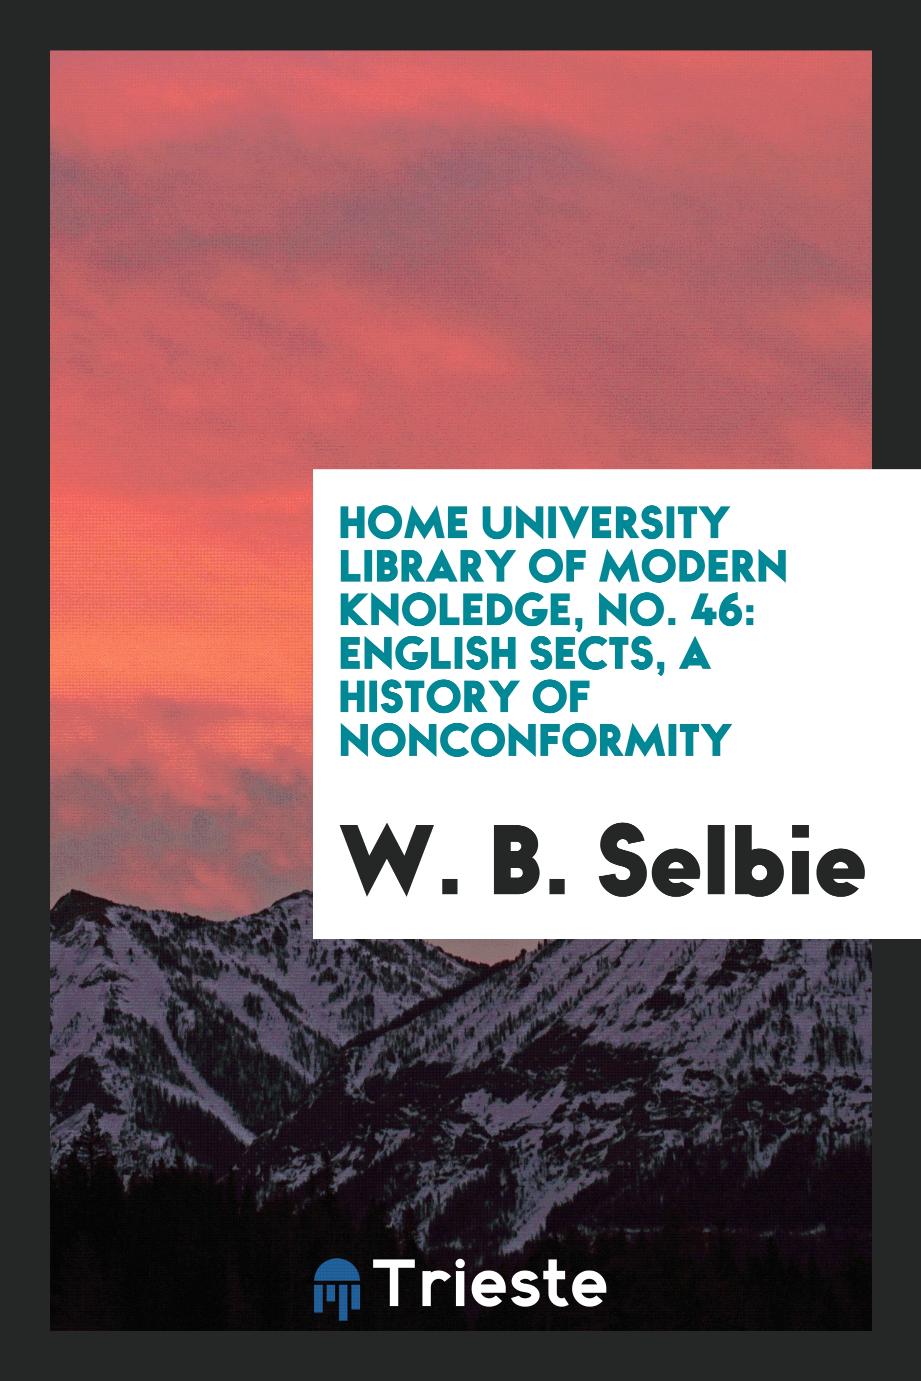 Home university library of modern knoledge, No. 46: English sects, a history of nonconformity